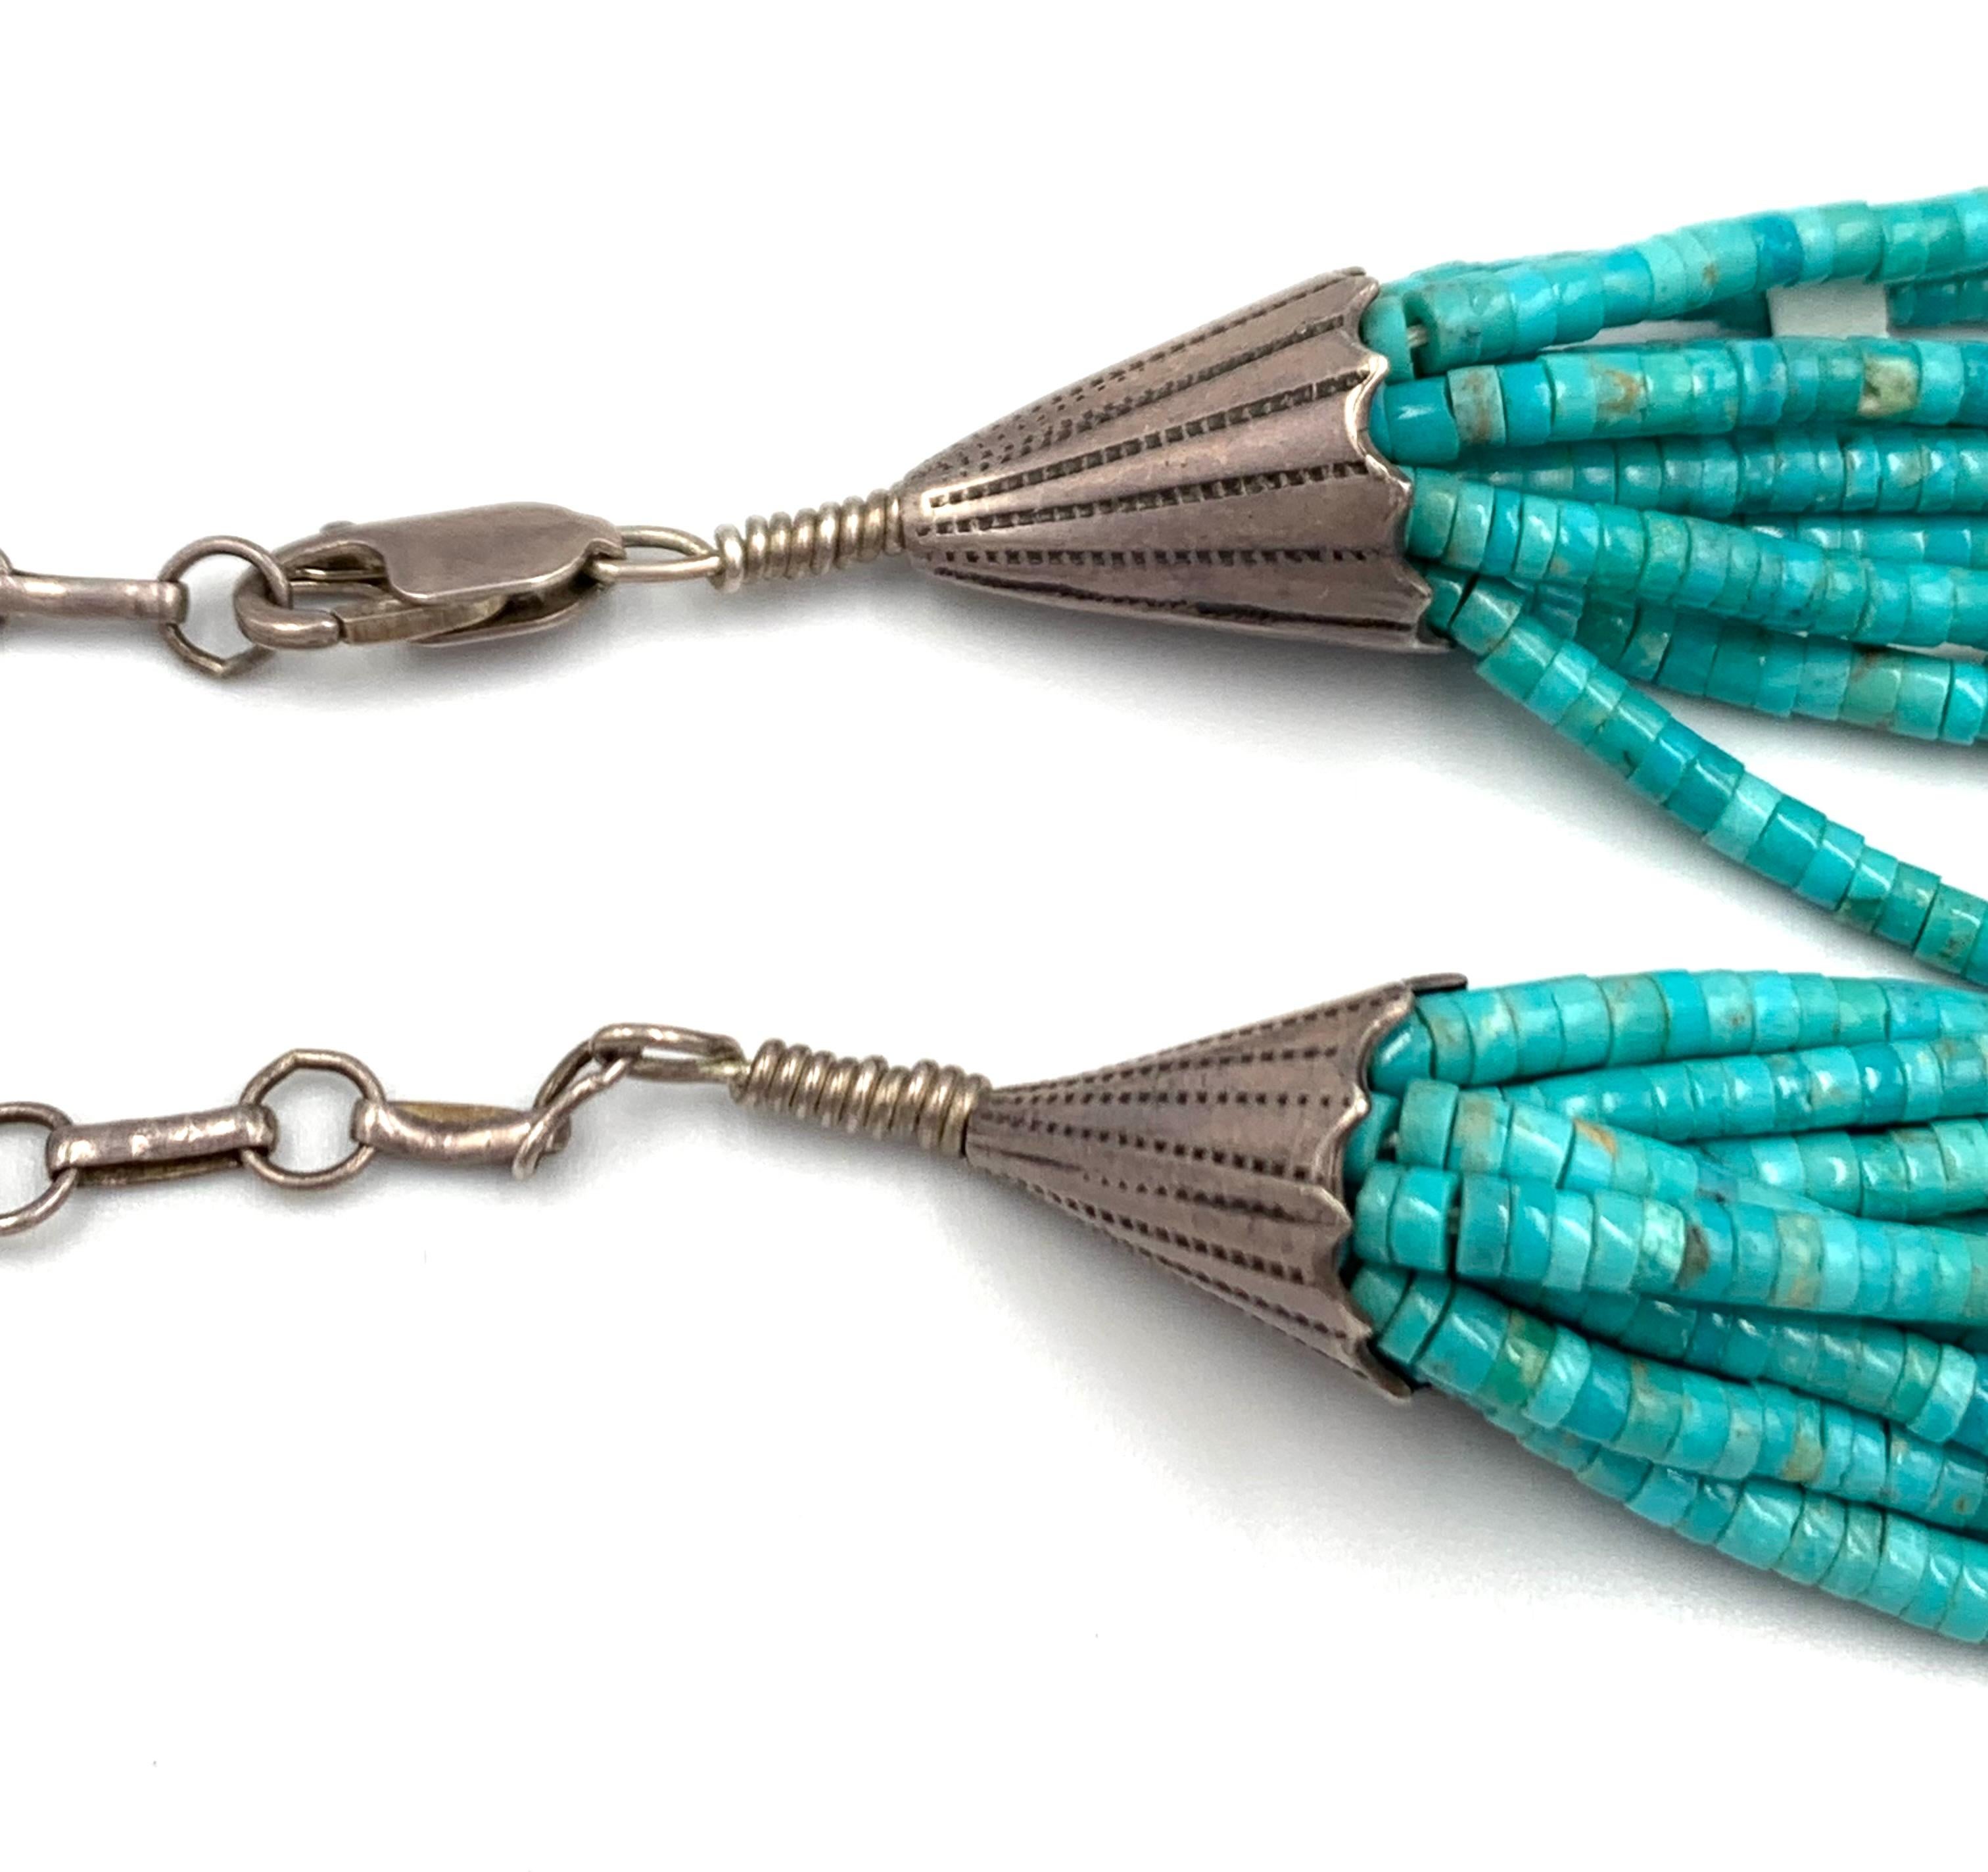 Ten strands of hand rolled turquoise heishi beads. Each of the 18” strands are interspersed with jet and coral beads. The strands are gathered by 1 ¼” silver cones with a 4” extension for a total length of 23”.

For hundreds of years, Santo Domingo